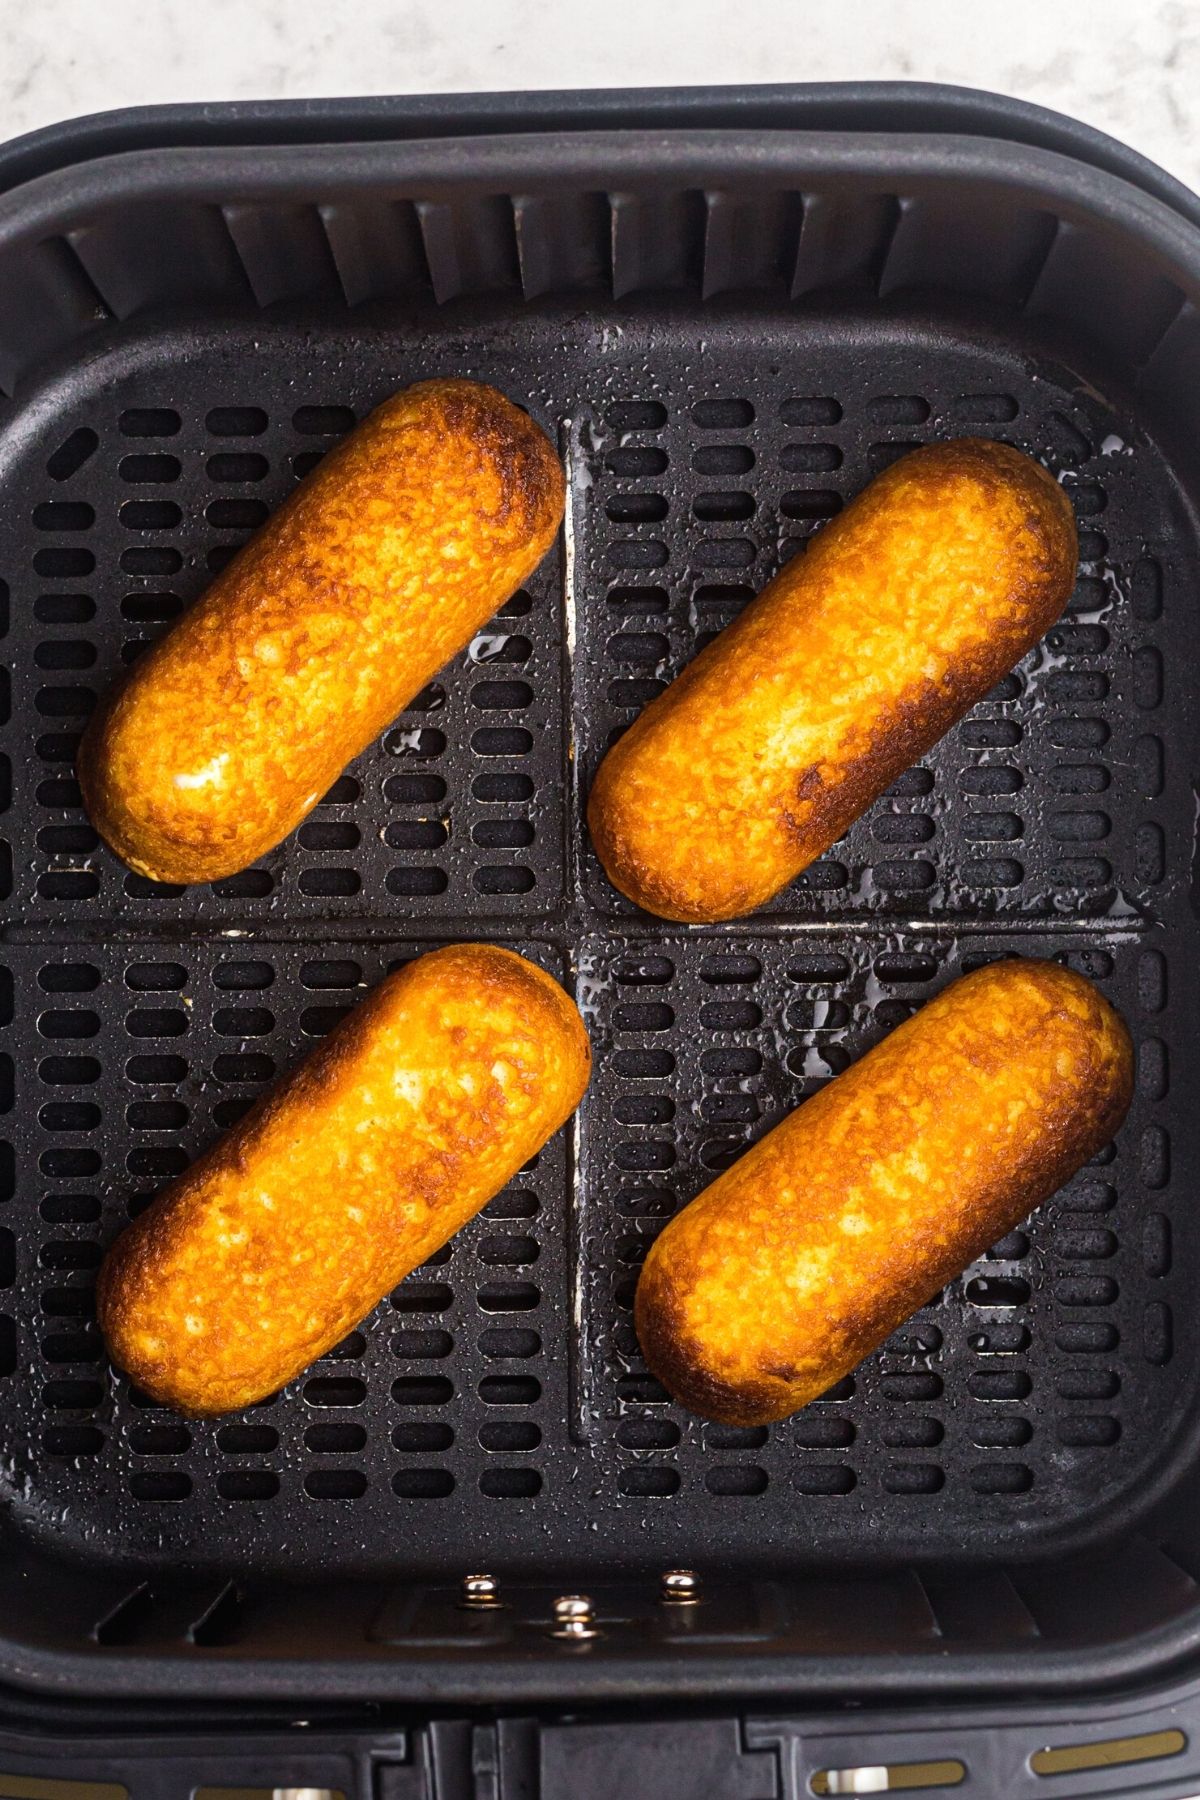 Golden crispy twinkies in the air fryer basket after being cooked